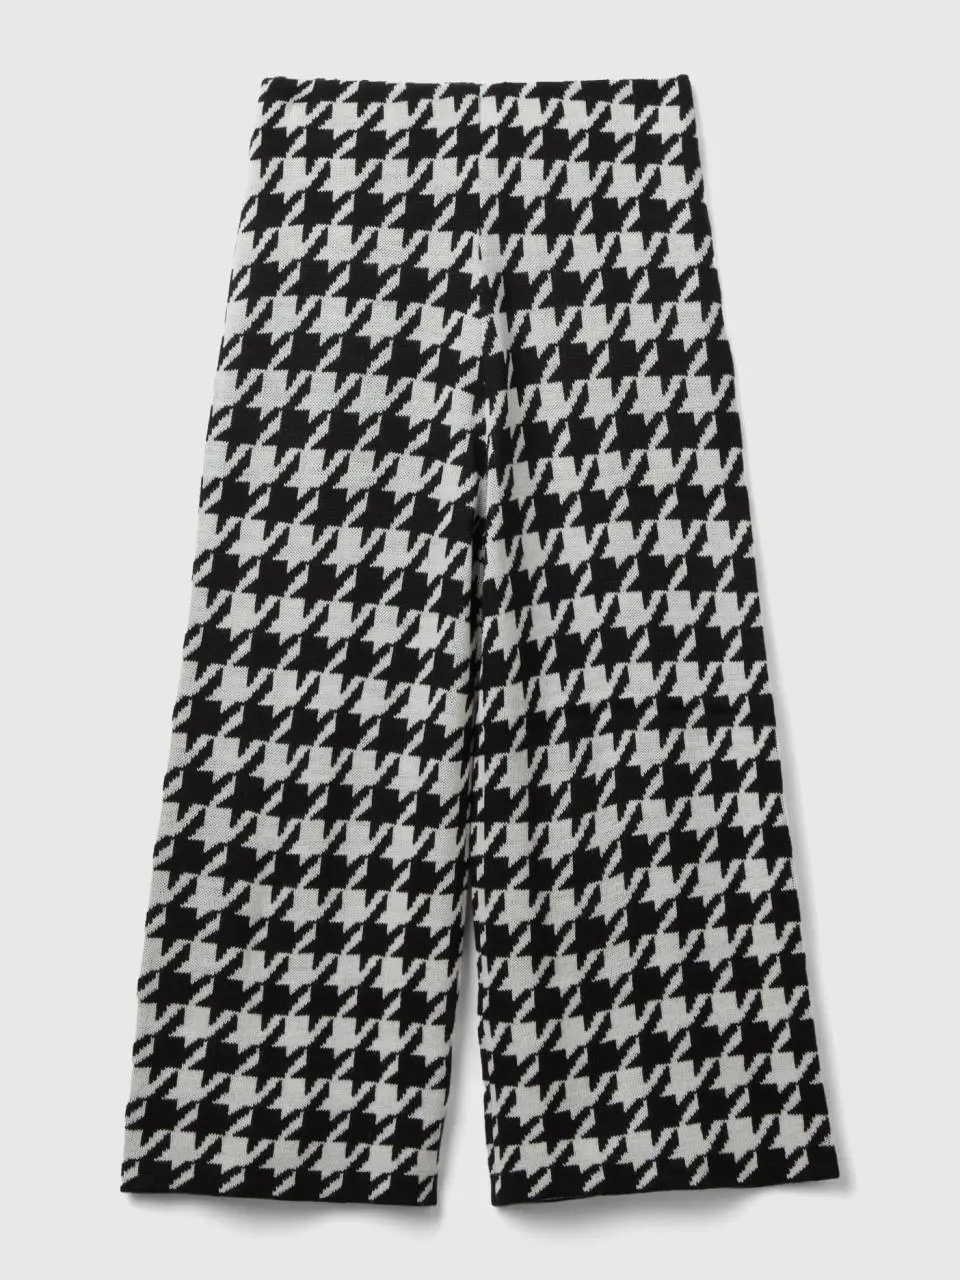 Benetton knit houndstooth trousers. 1